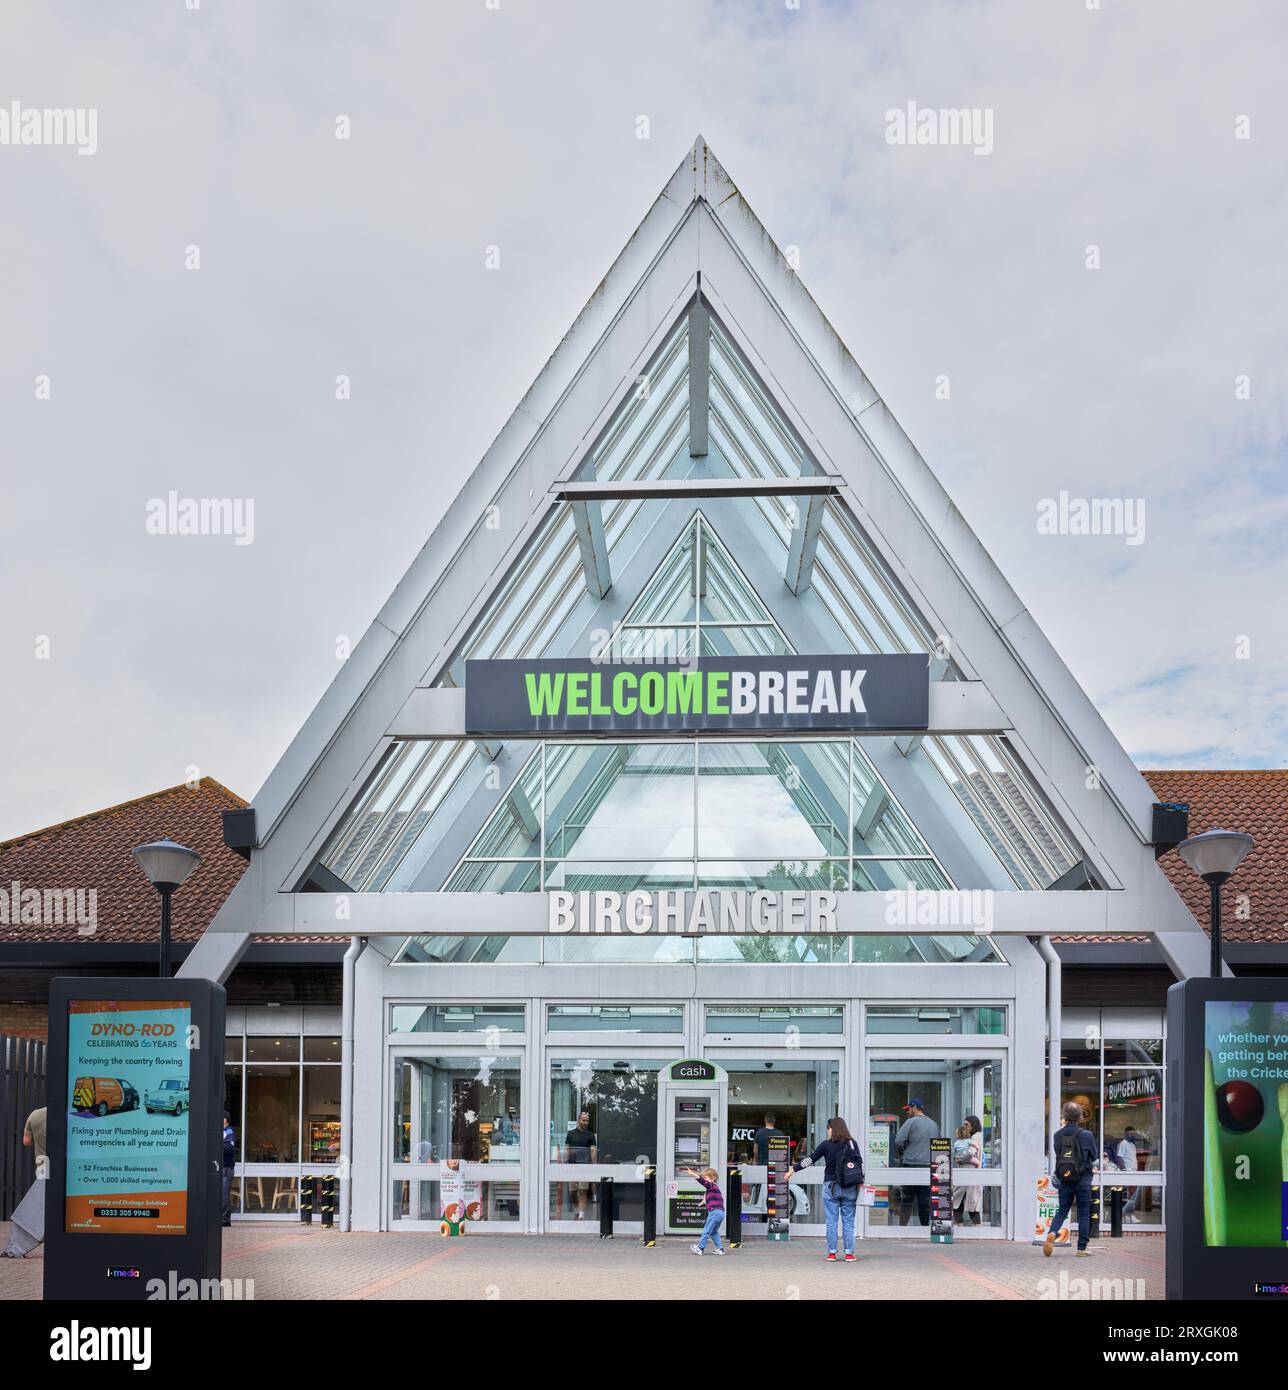 Welcomebreak service station at Birchanger by the M11 motorway, England. Stock Photo